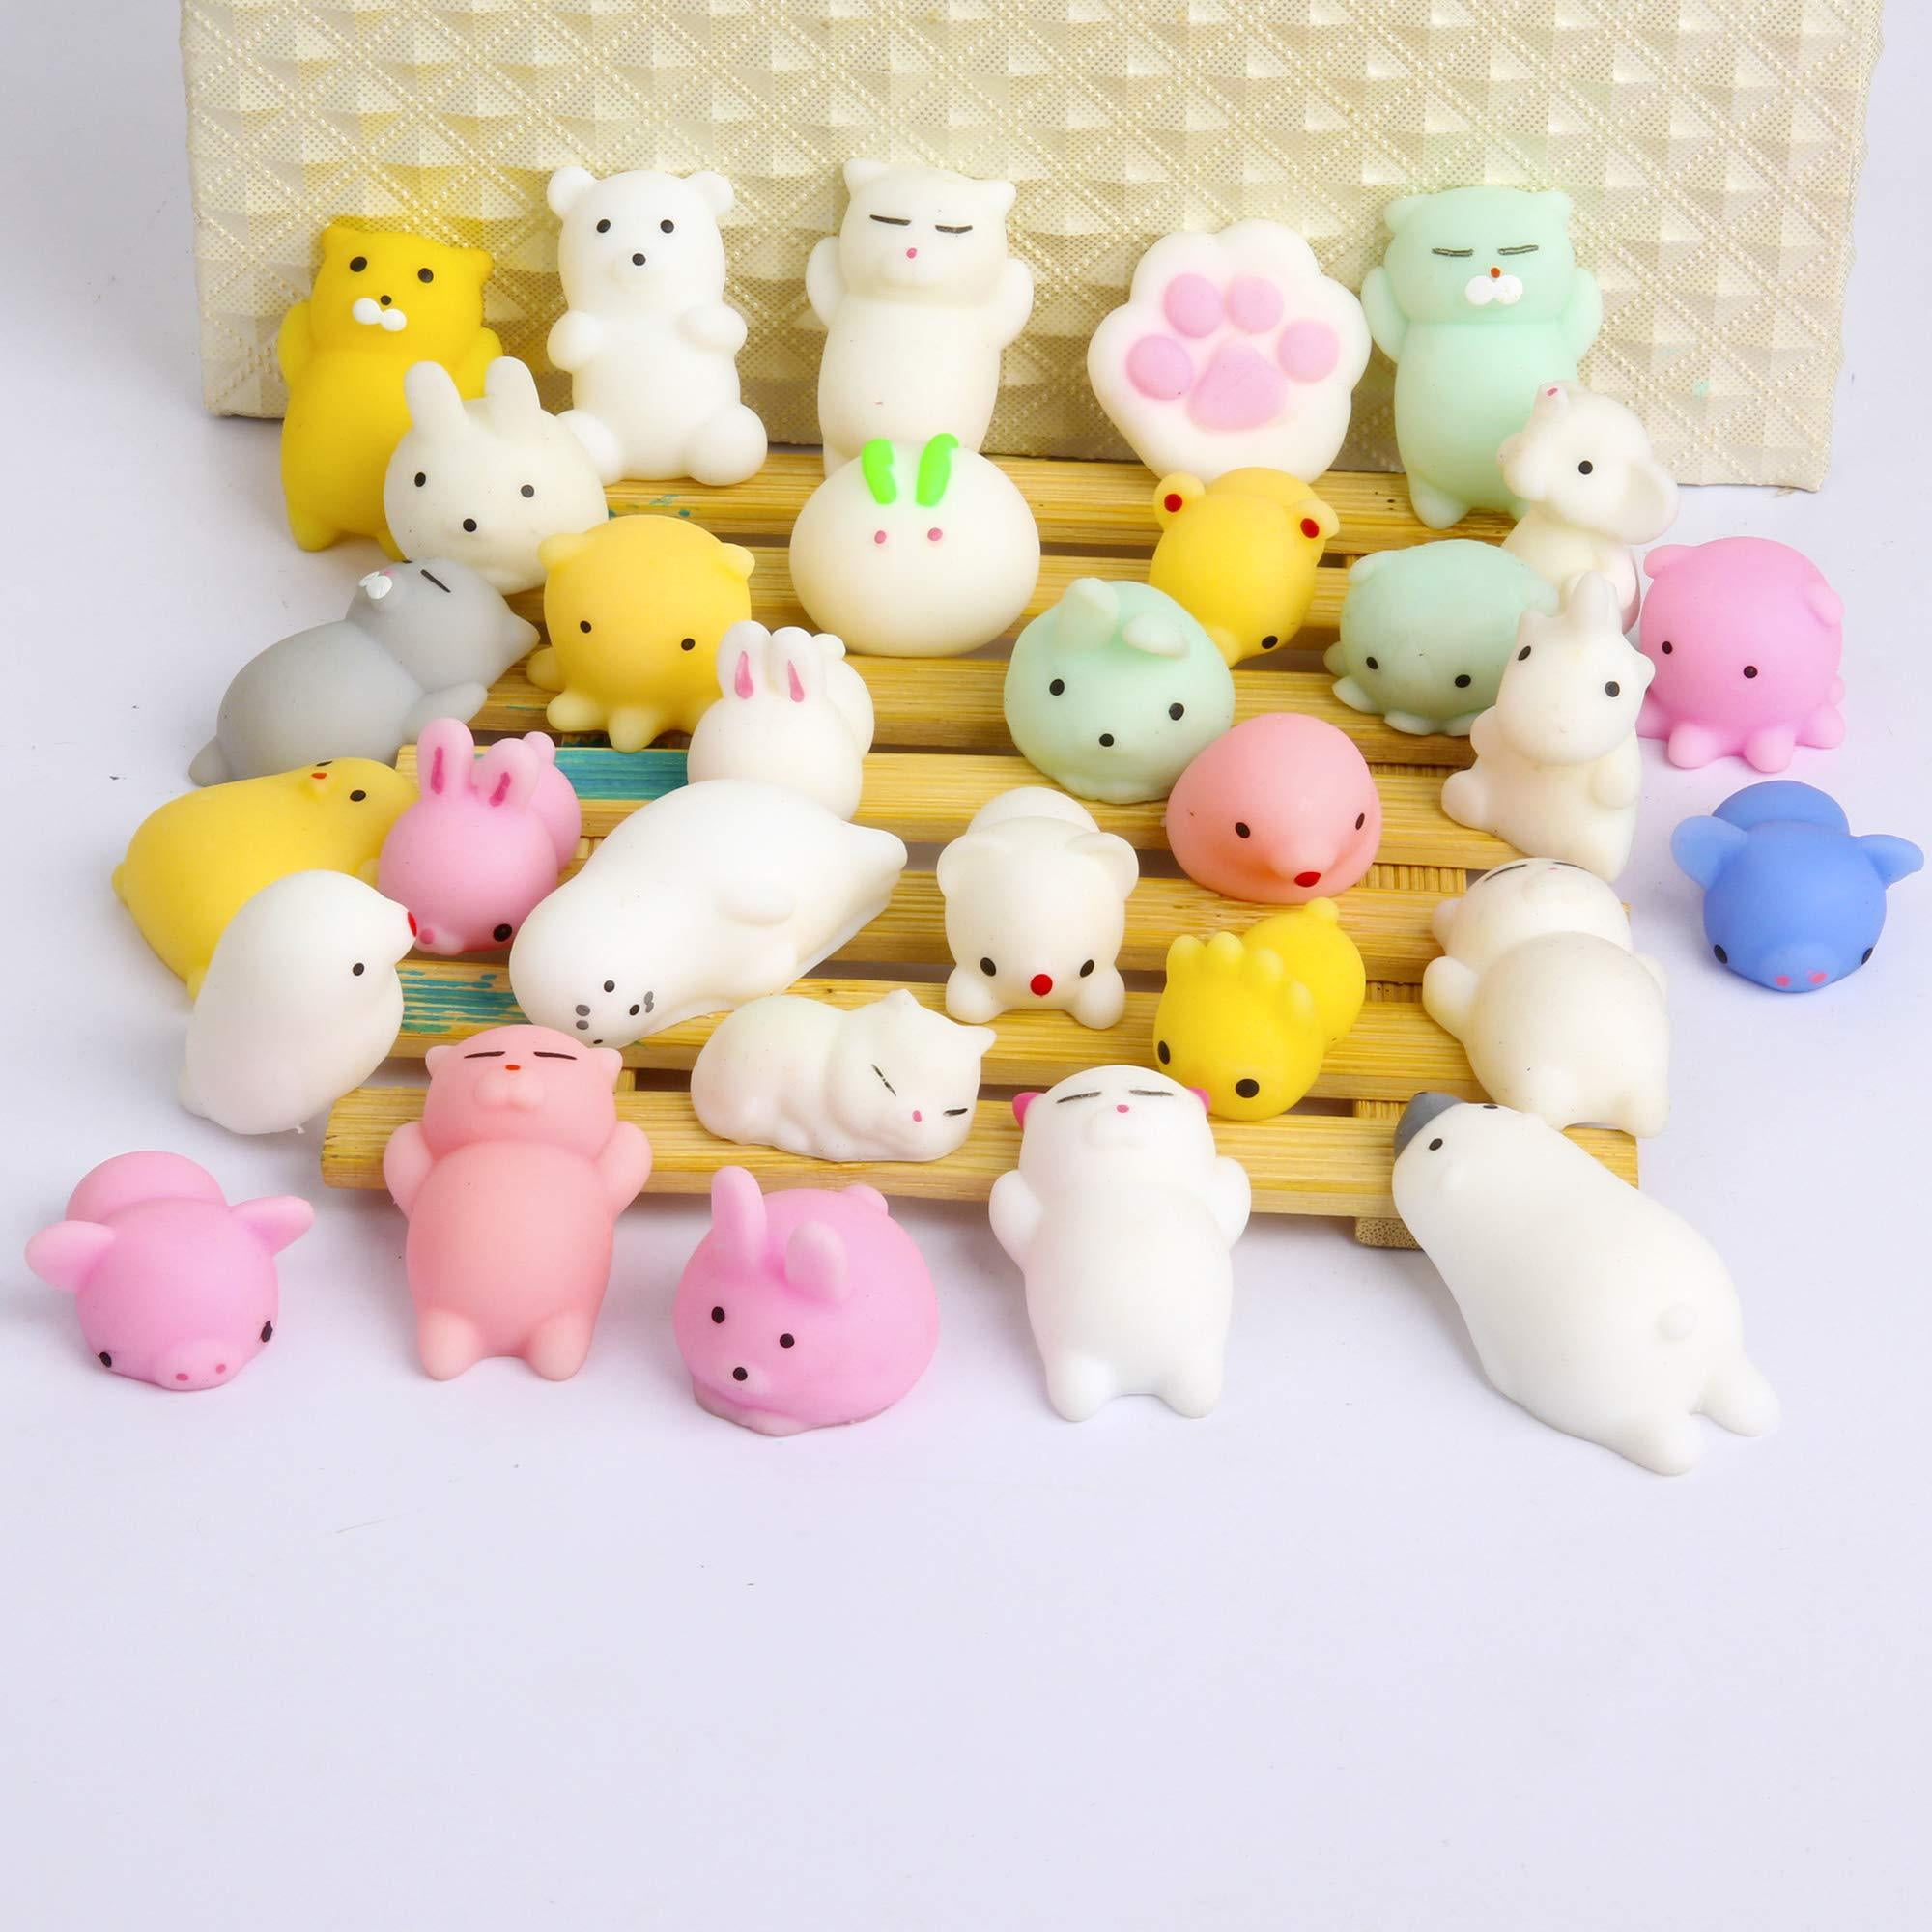 Kids Favorite Cute Kittens Squishy Slime Surprise Milk Box Toys ▻   ▻ Free Shipping ▻ Up to 70% OFF